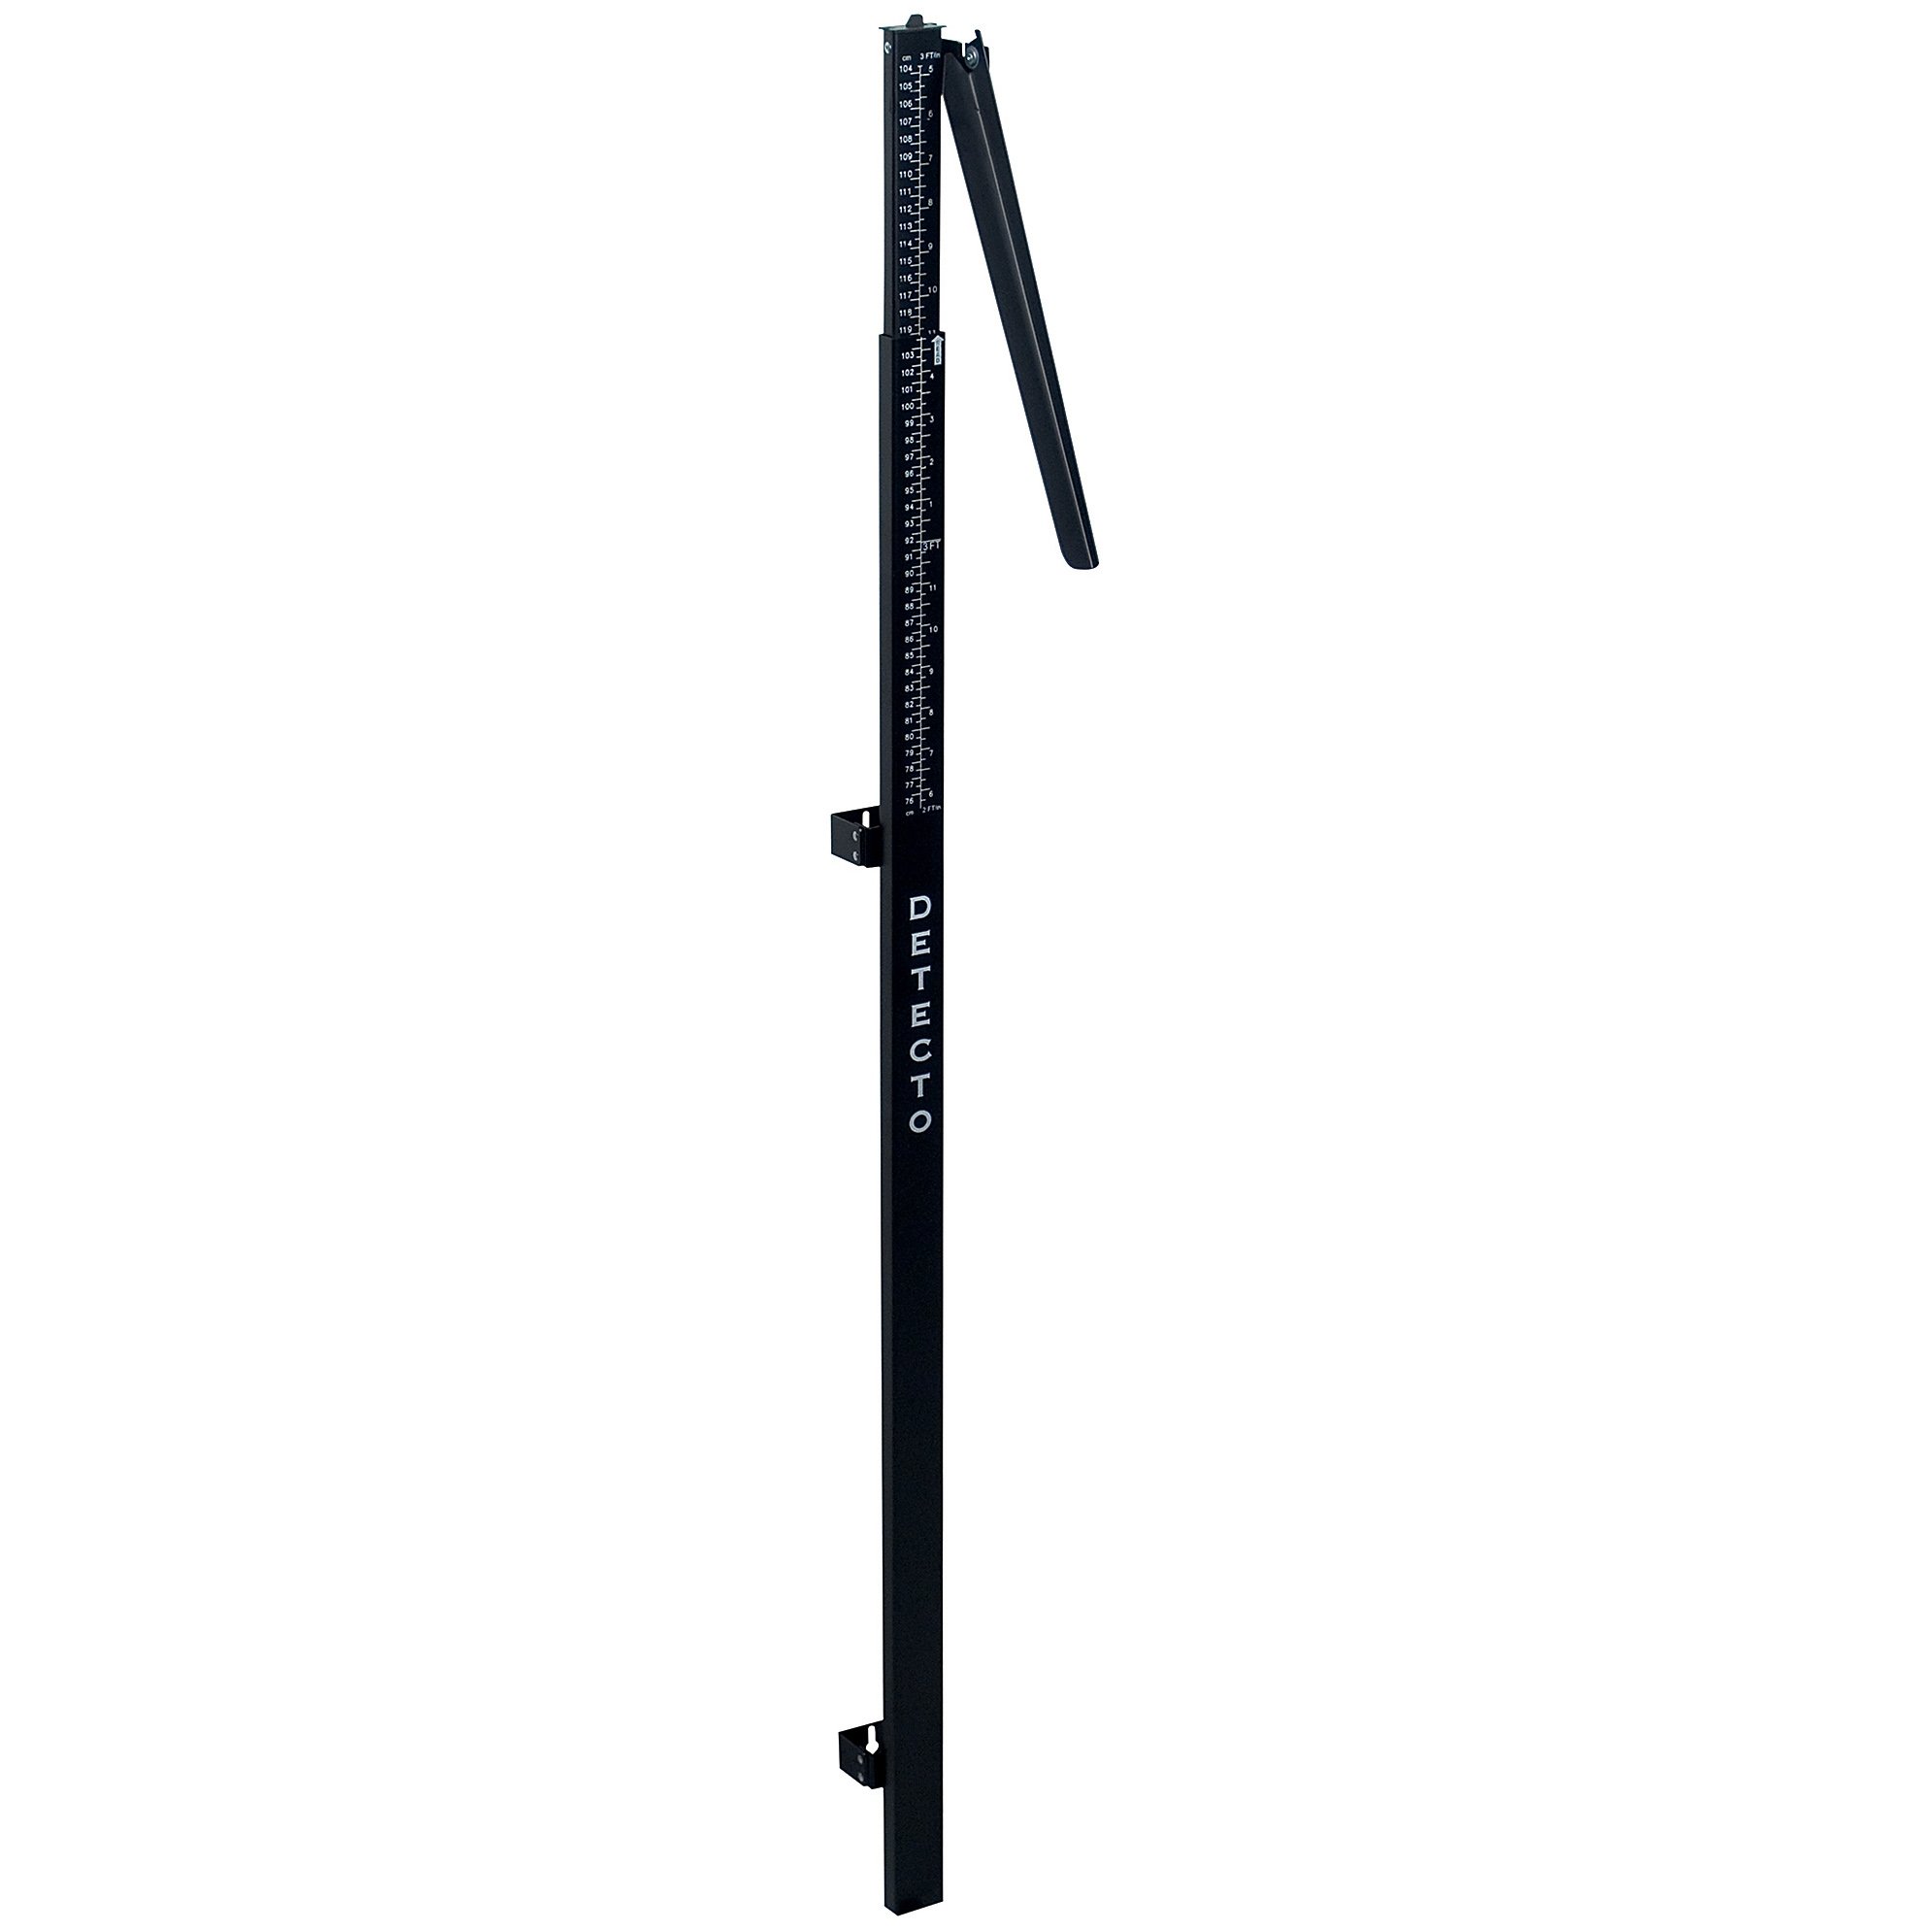 Detecto 3P Height Rod for Wall Mount